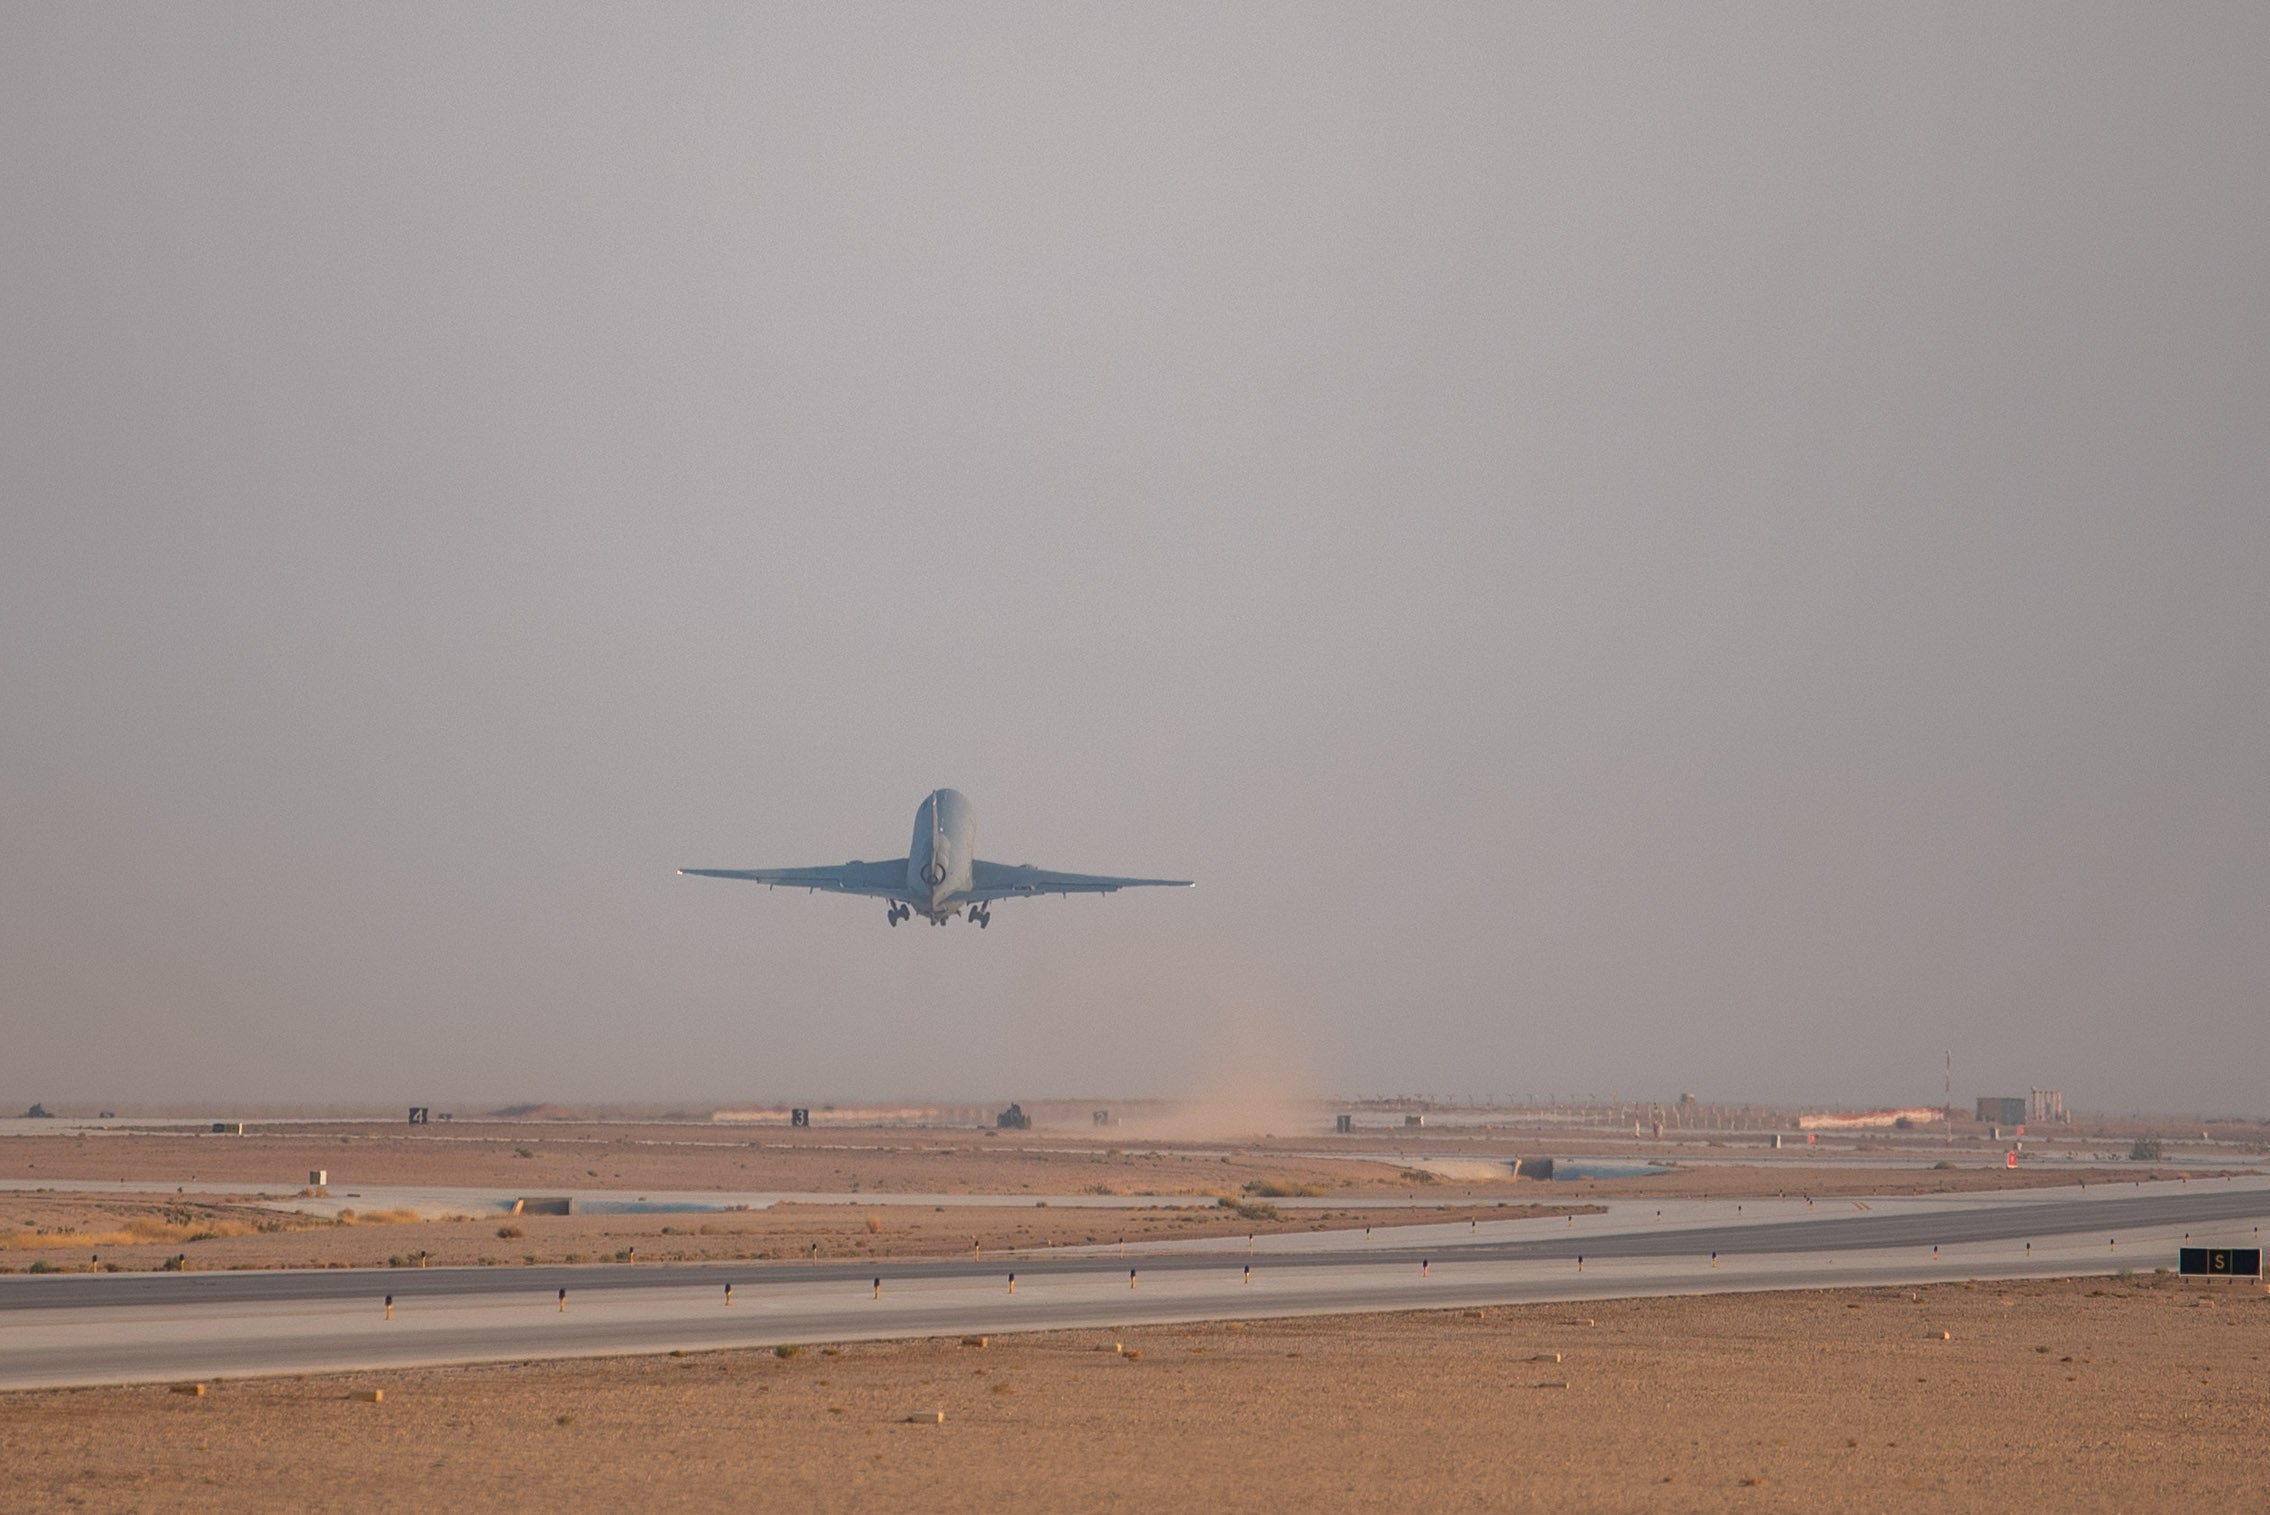 A KC-10 Extender takes flight after conducting the airframe's final combat deployment at Prince Sultan Air Base (PSAB), Kingdom of Saudi Arabia, Oct. 5, 2023. The departure of the KC-10 at PSAB marked the end of the airframe's over 30 years of service within the U.S. Air Forces Central (AFCENT) Area of Responsibility. By September 2024, the U.S. Air Force's fleet of KC-10s will be decommissioned and gradually replaced by the KC-46 aircraft. (U.S. Air Force photo by Tech. Sgt. Alexander Frank)